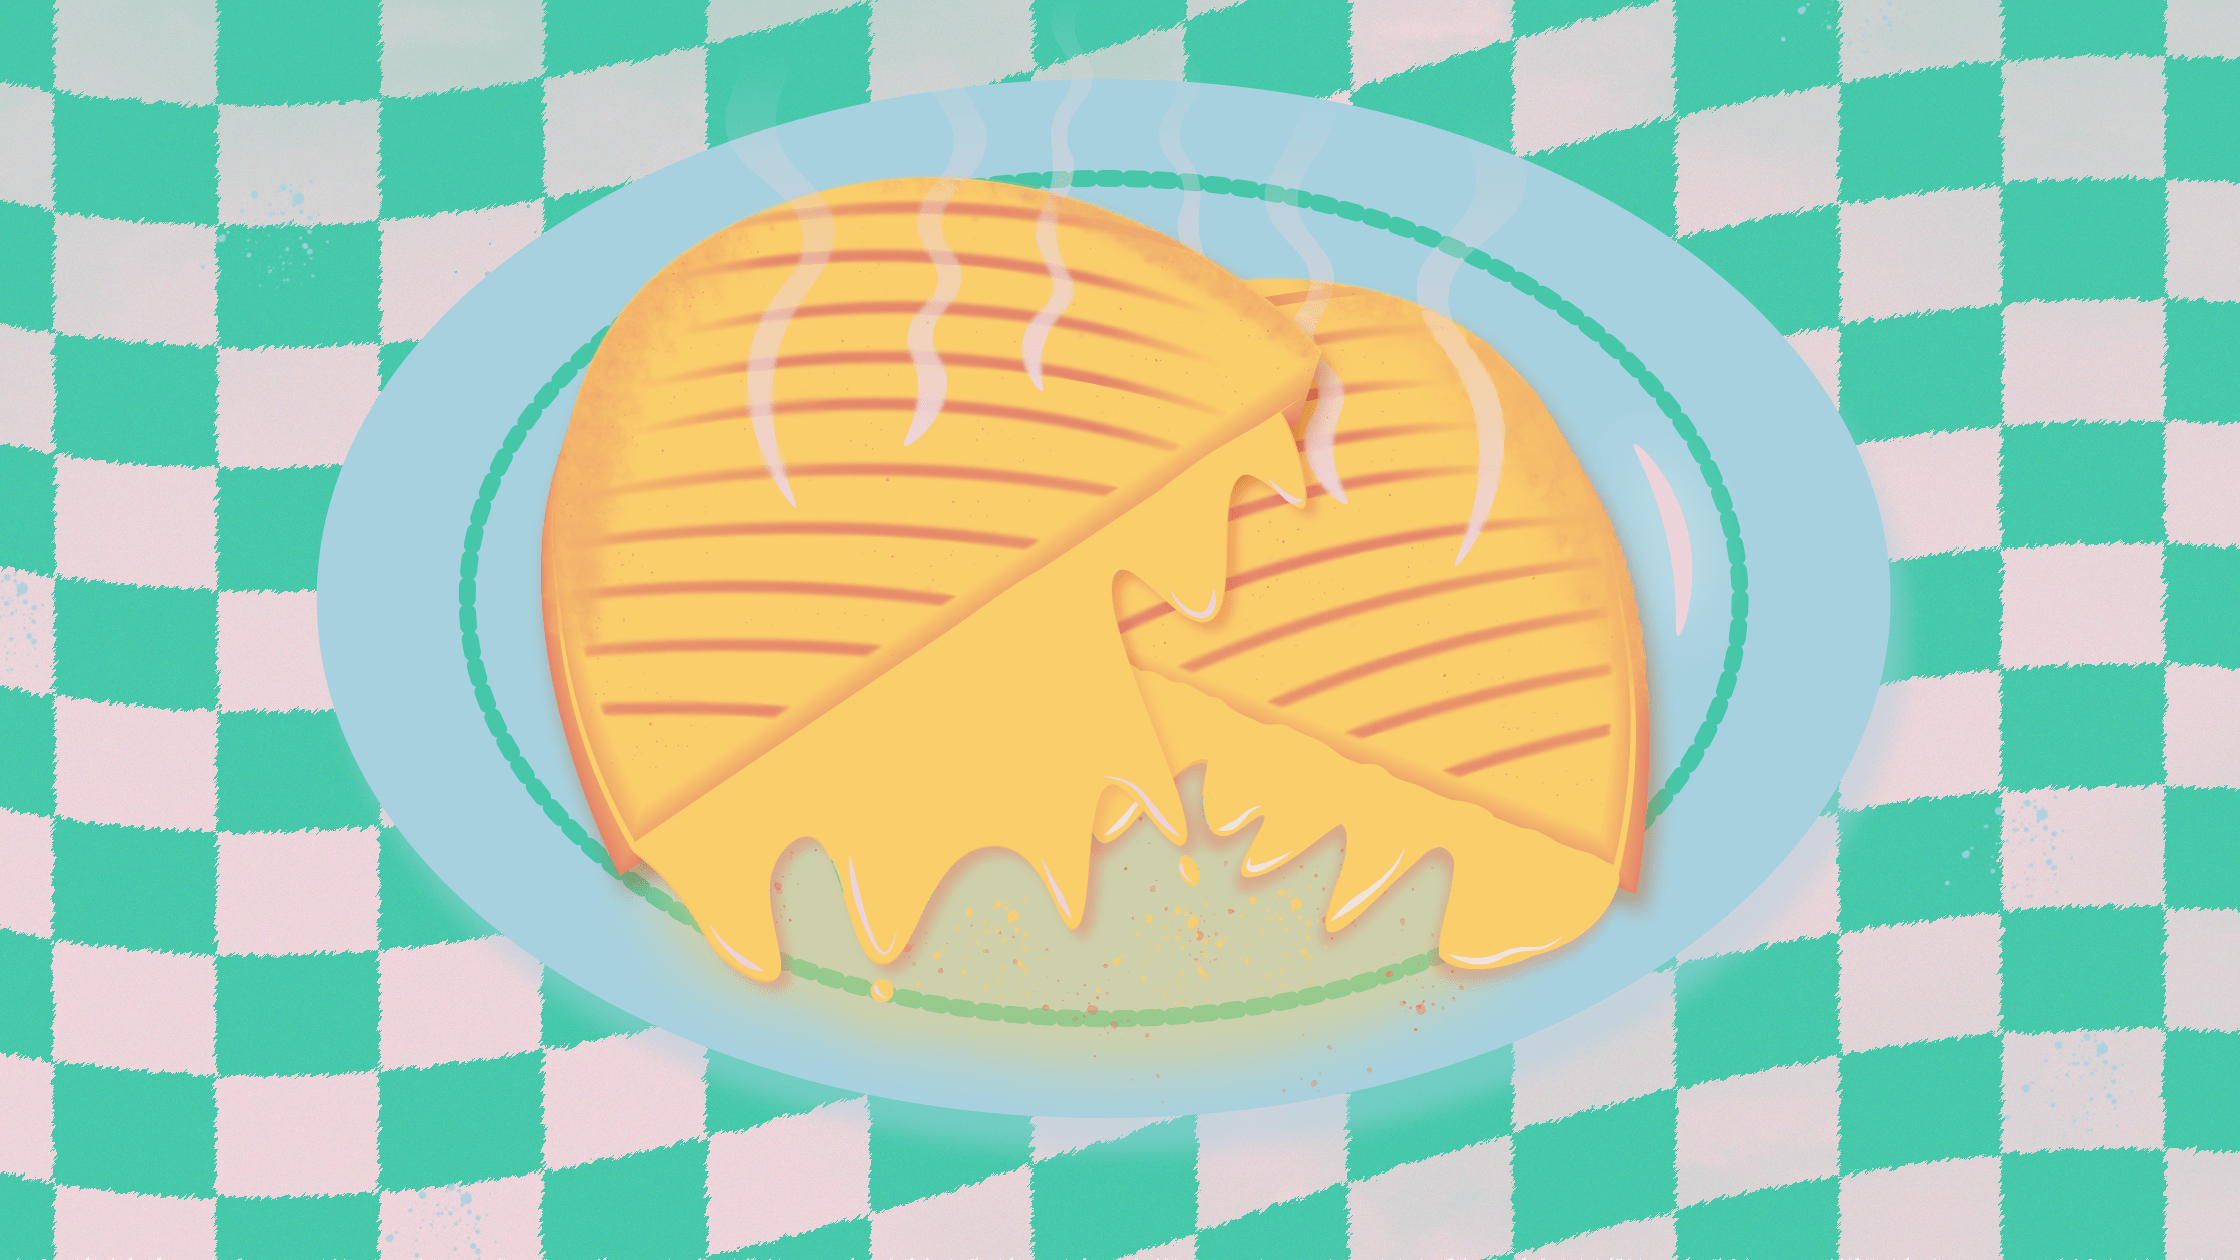 Illustration of a panini on a blue plate.